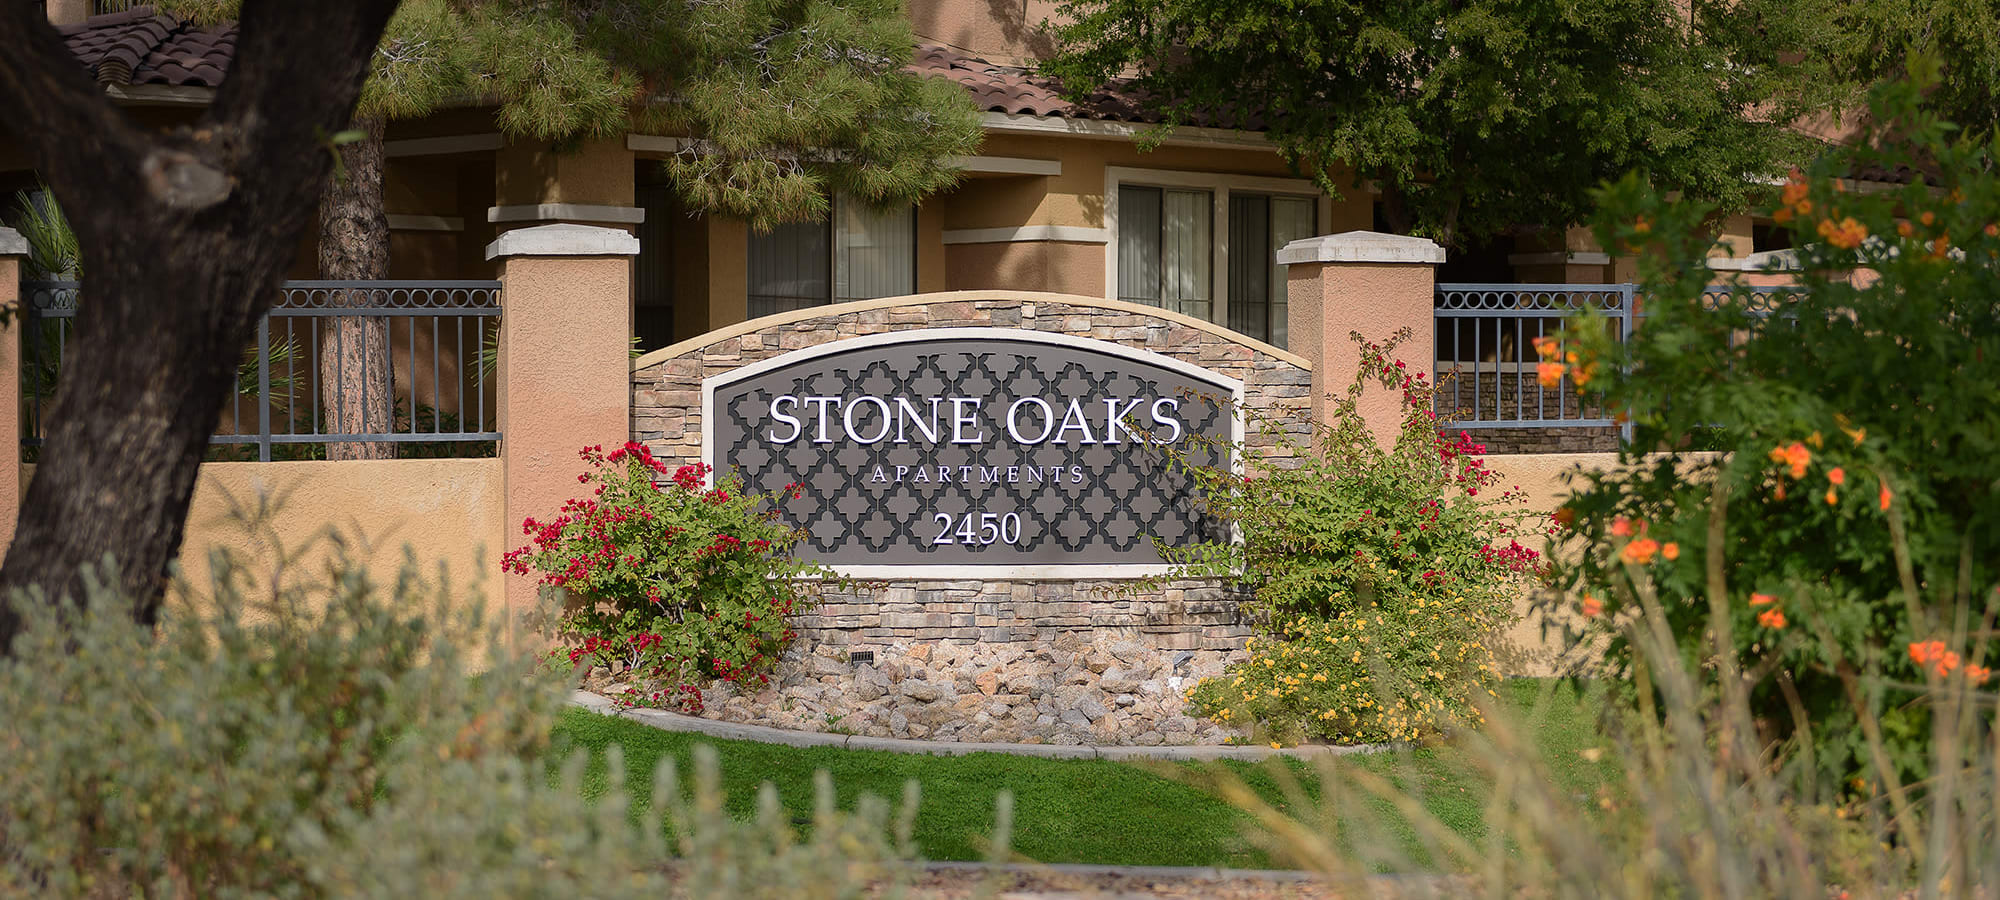 Monument sign at Stone Oaks in Chandler, Arizona